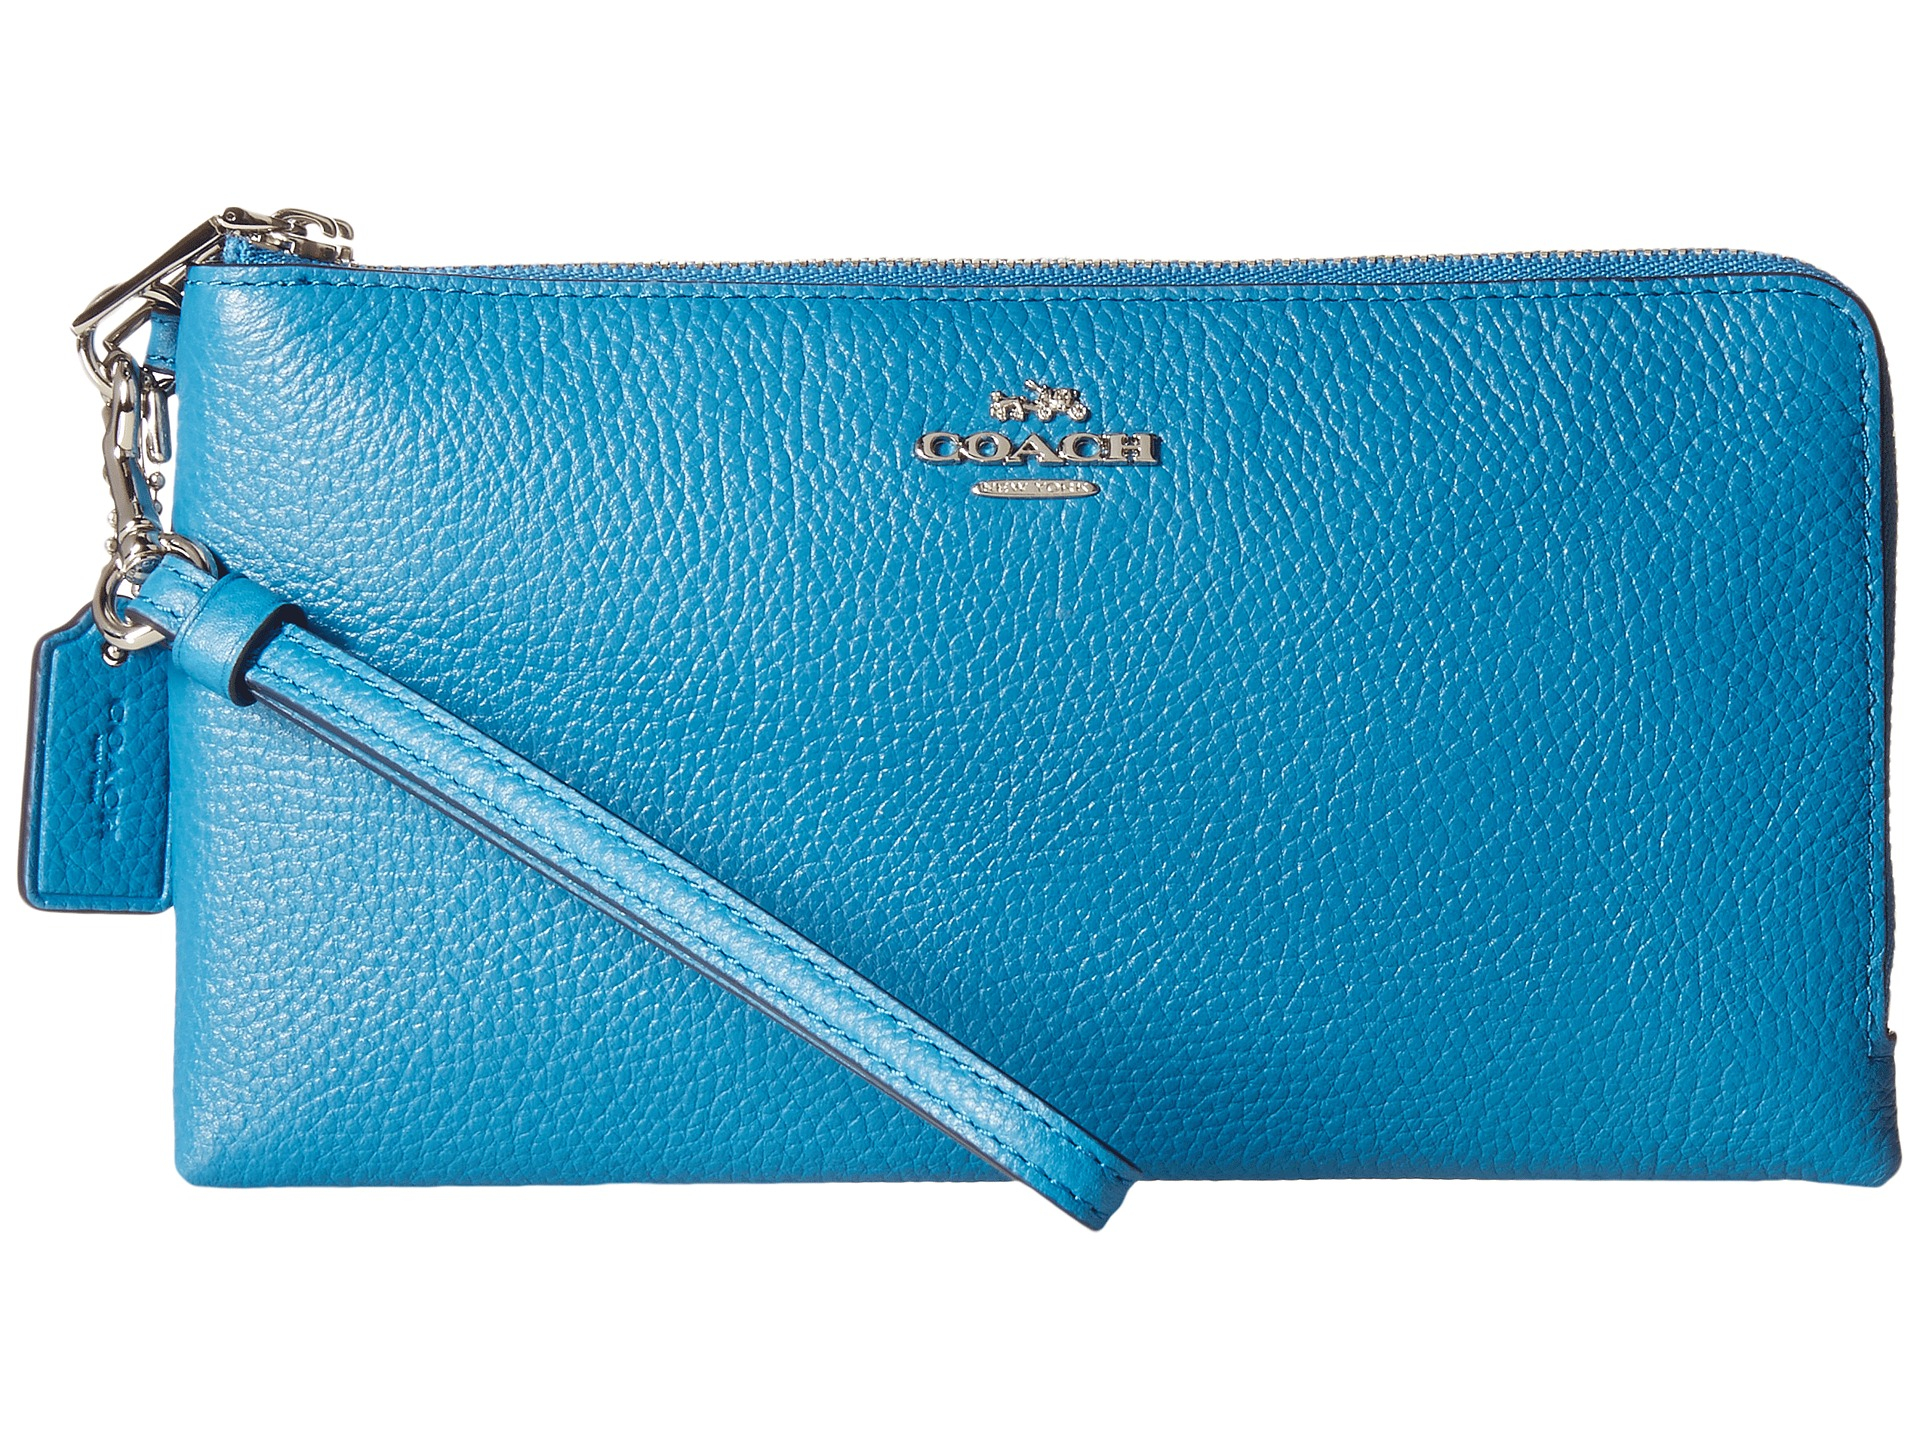 Lyst - Coach Polished Pebbled Leather Double Zip Wallet in Blue